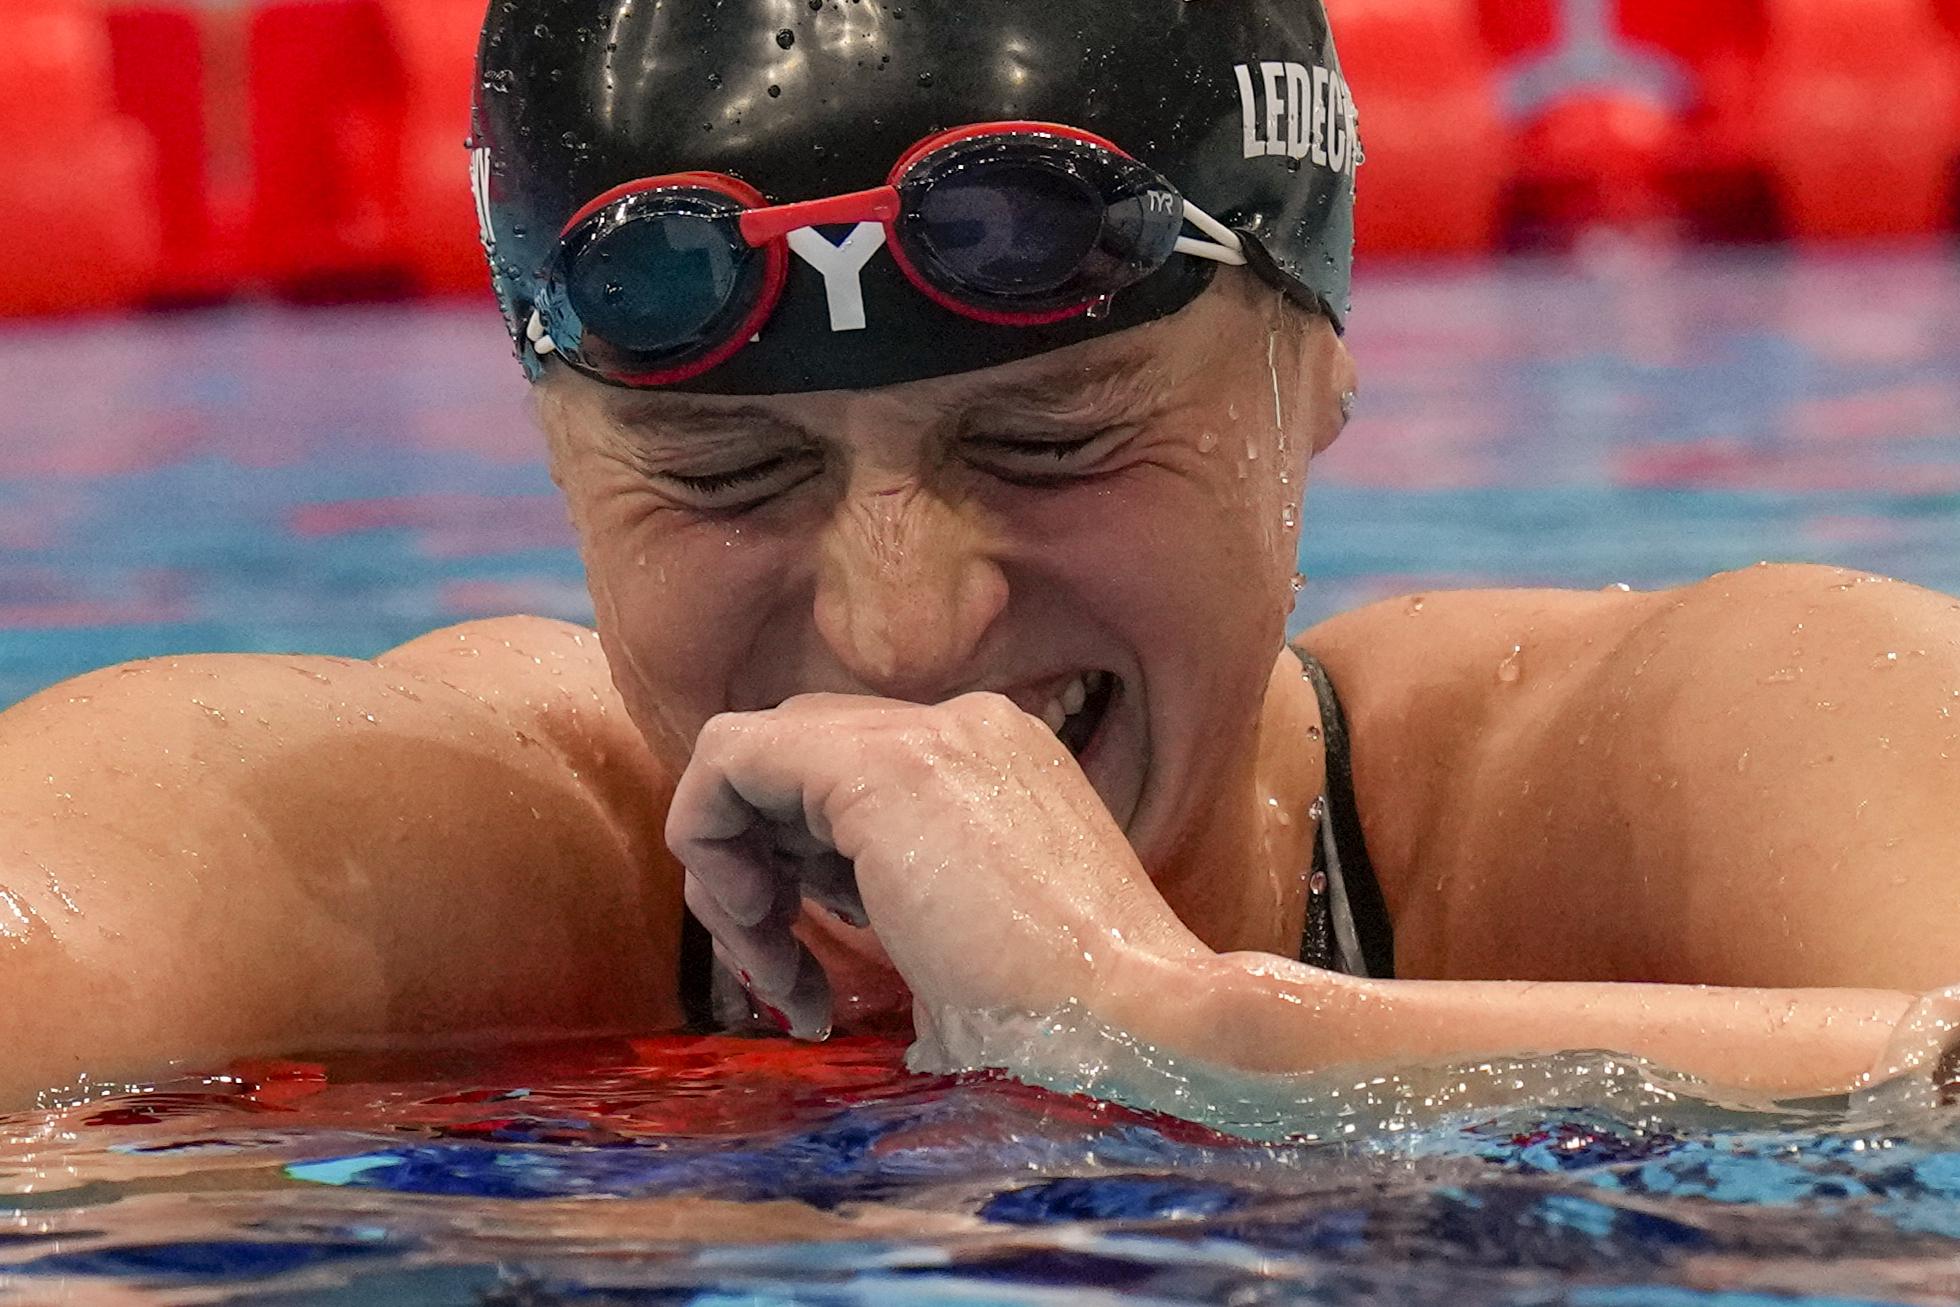 “Just proud”: Ledecky finally wins gold at Tokyo Olympics